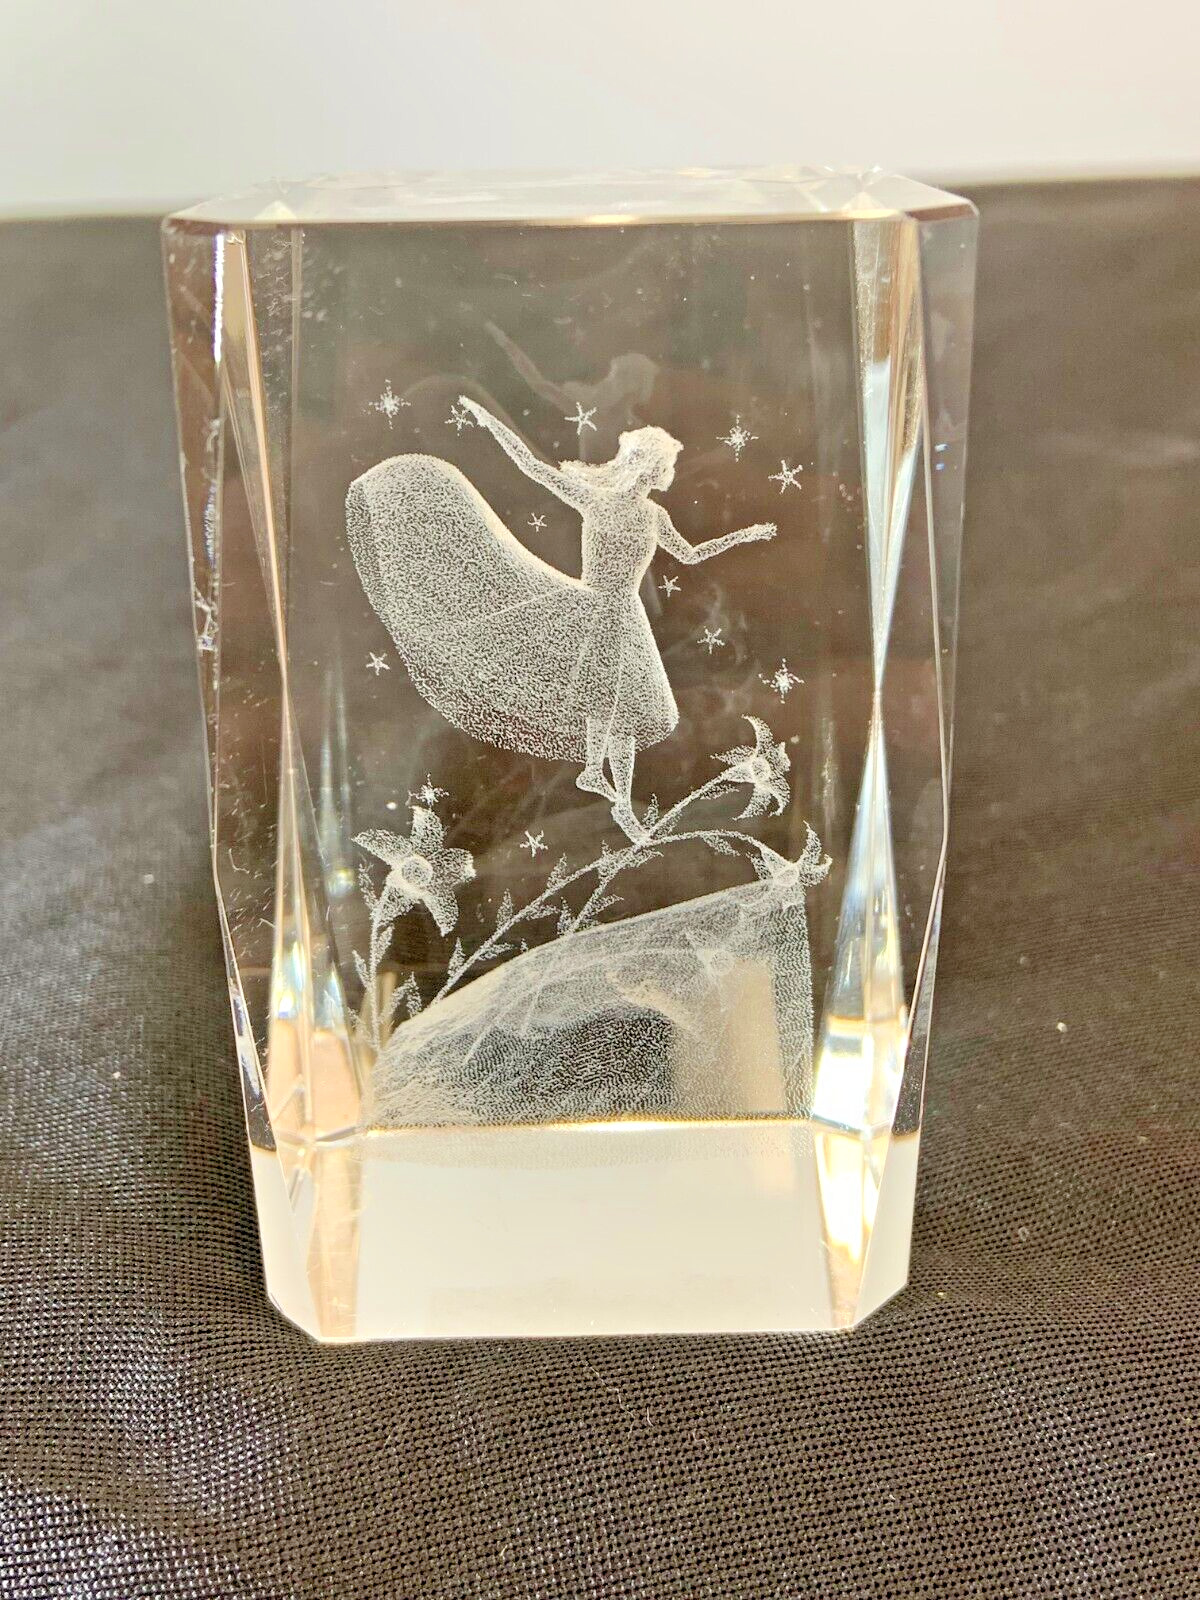 MAGICAL FAIRY AND FLOWERS GLASS PAPERWEIGHT LASER ETCHED - BEAUTIFUL SERENITY